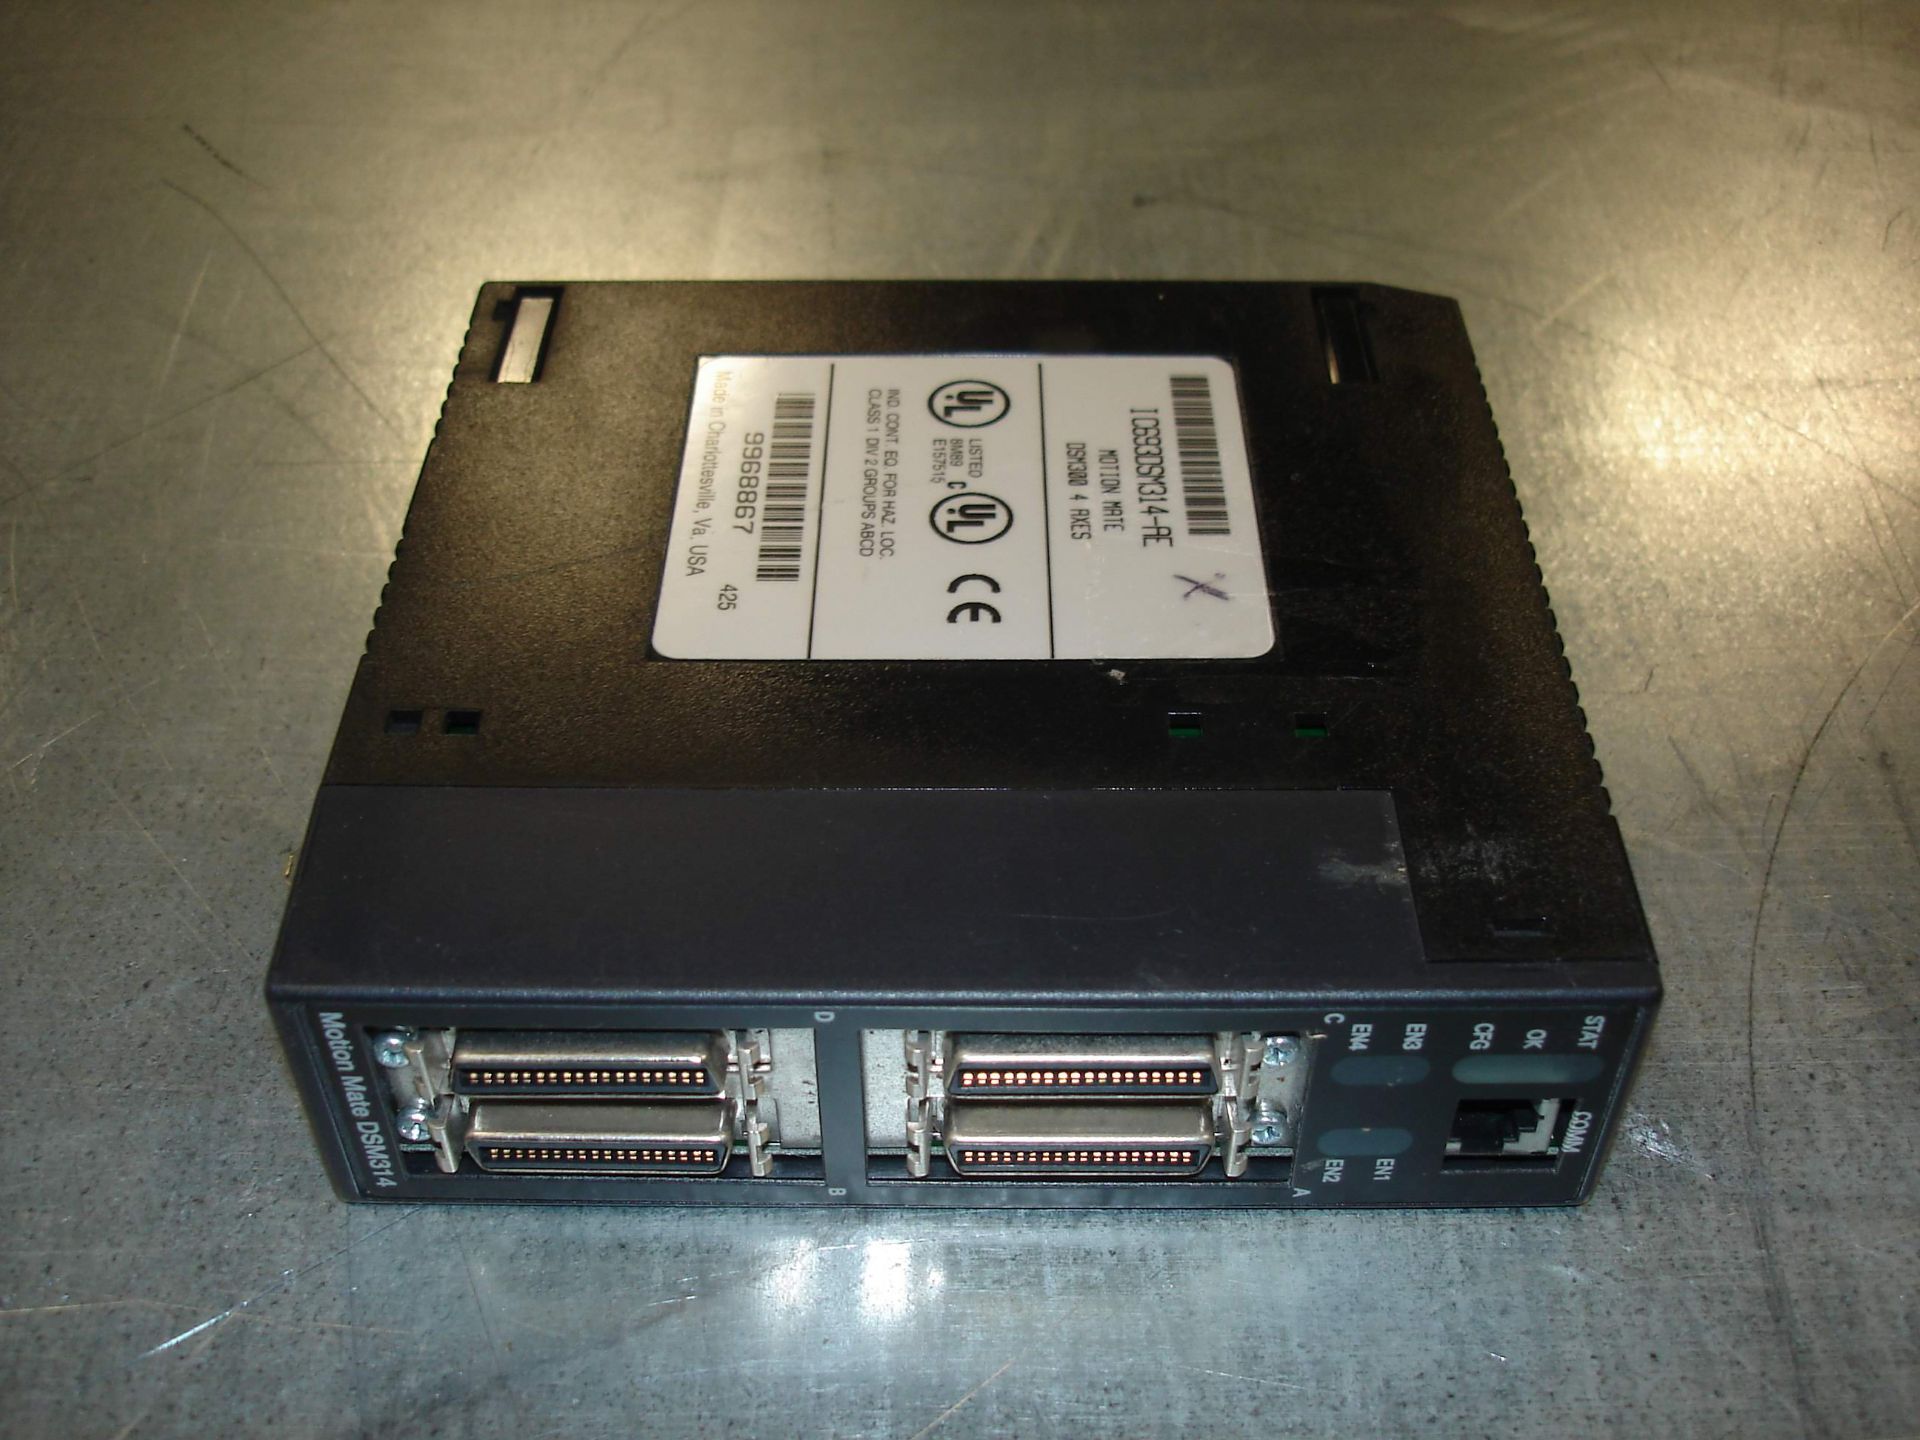 (1) IC693DSM314-AE GE FANUC MOTION MATE 4 AXES CONTROL MODULE USED. Pickup your lot(s) for free!